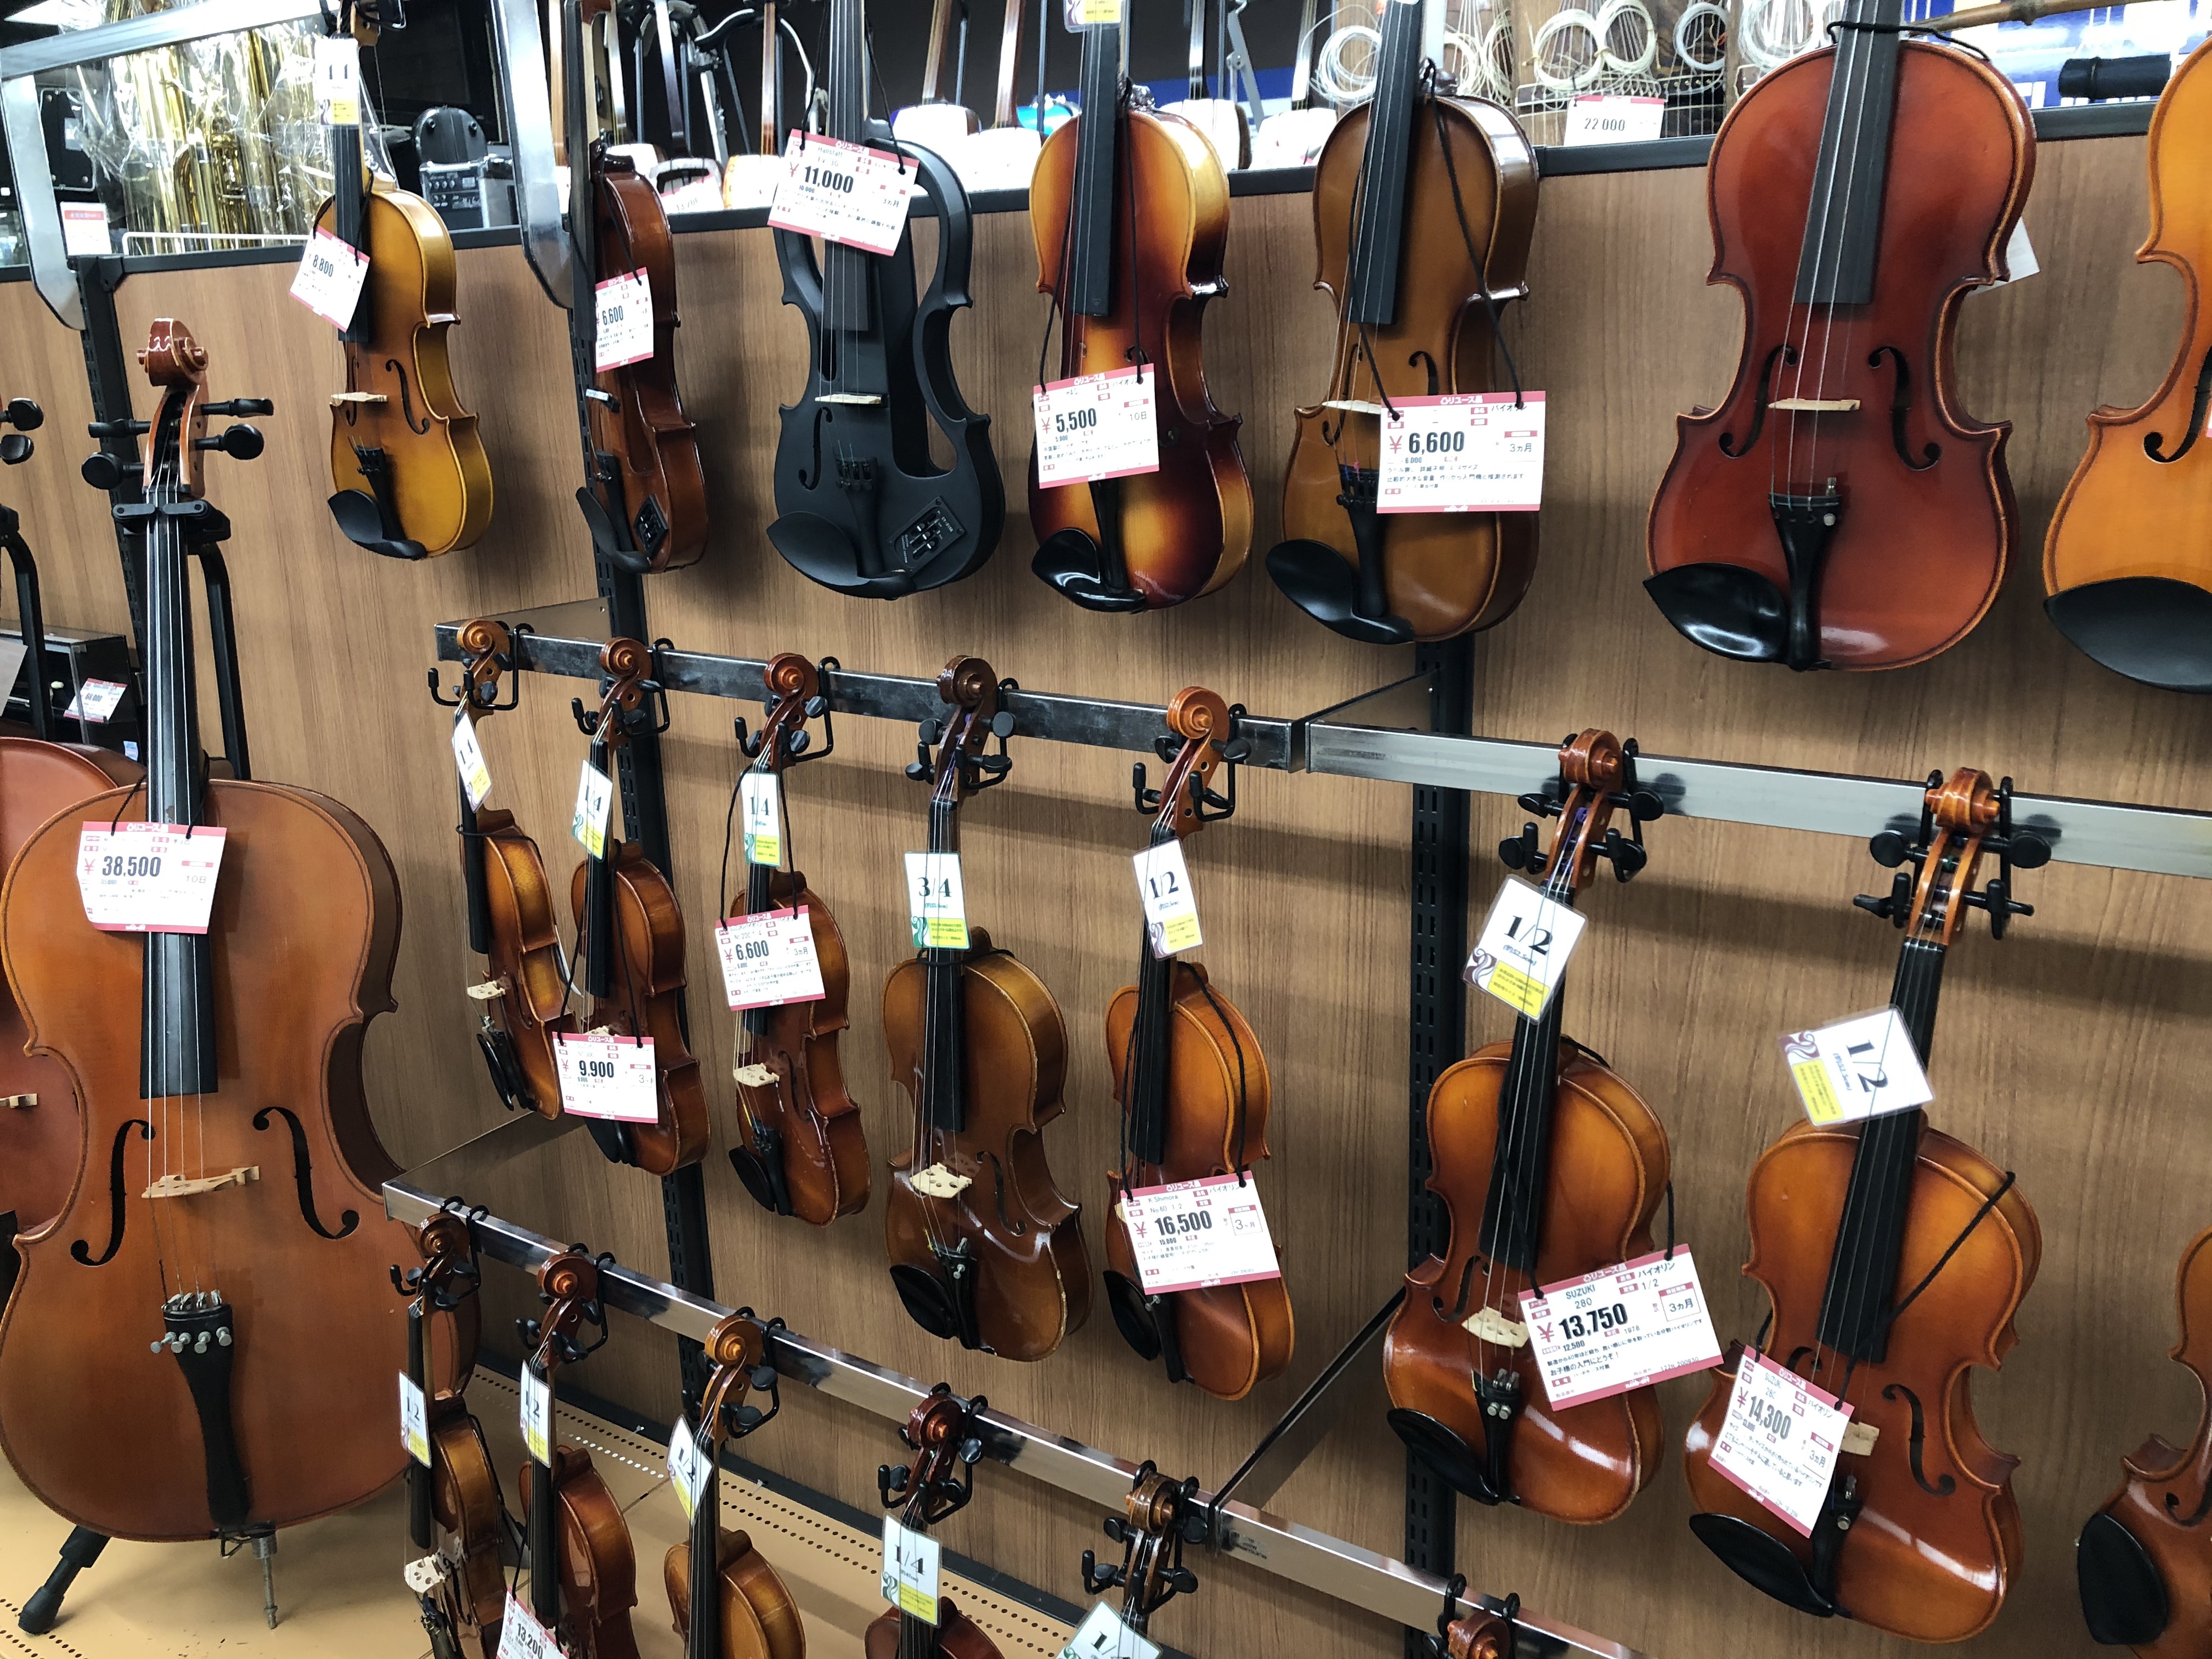 Second-hand violins, violas and cellos line the wall in the instruments floor of Hard Off, a recycle shop in Tokyo. Photo by Denisse Rauda